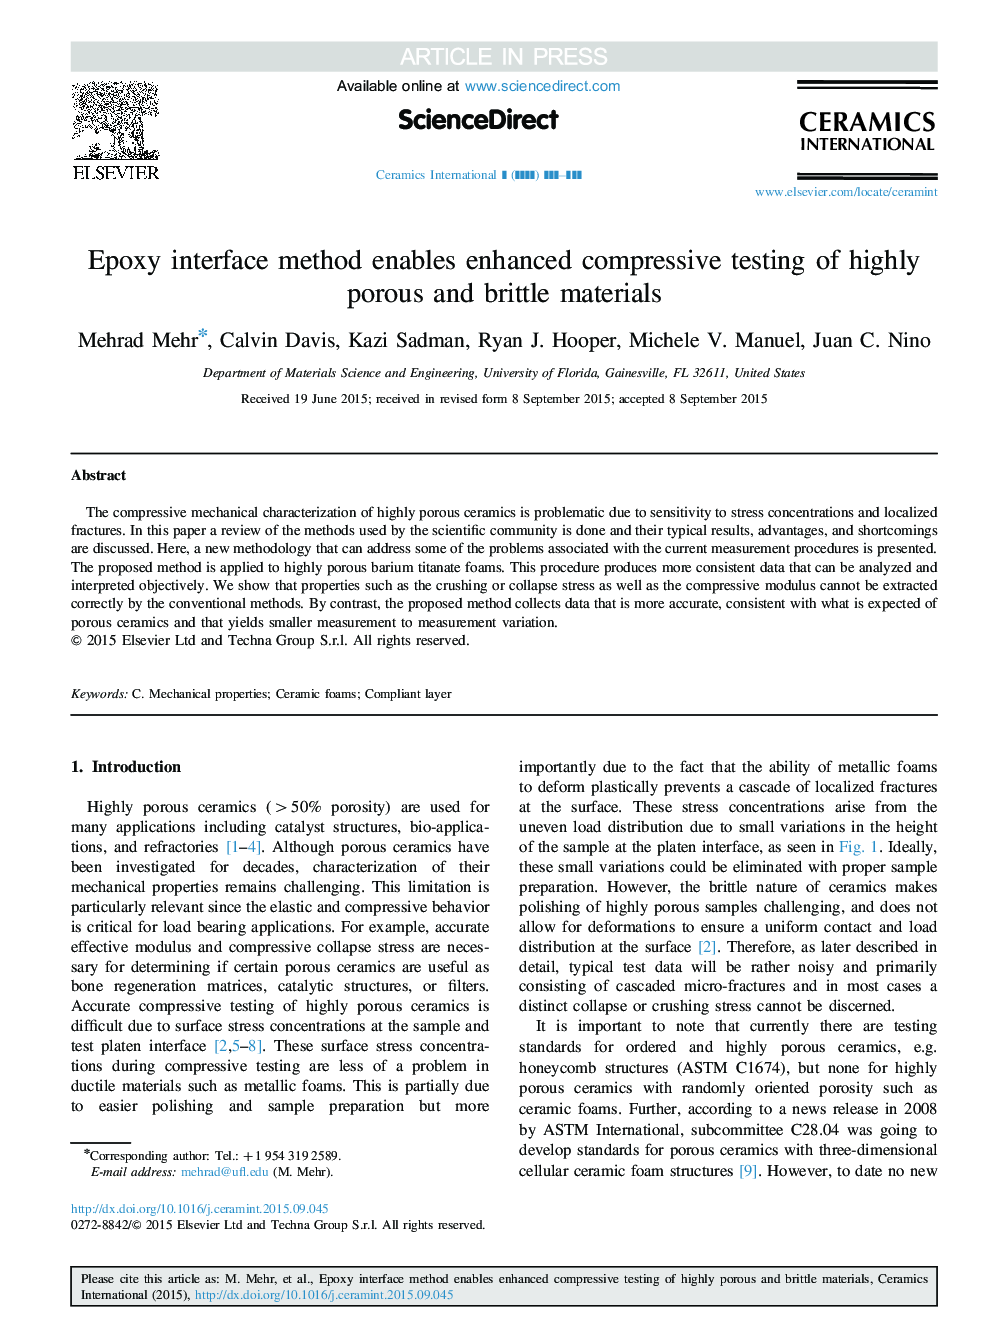 Epoxy interface method enables enhanced compressive testing of highly porous and brittle materials